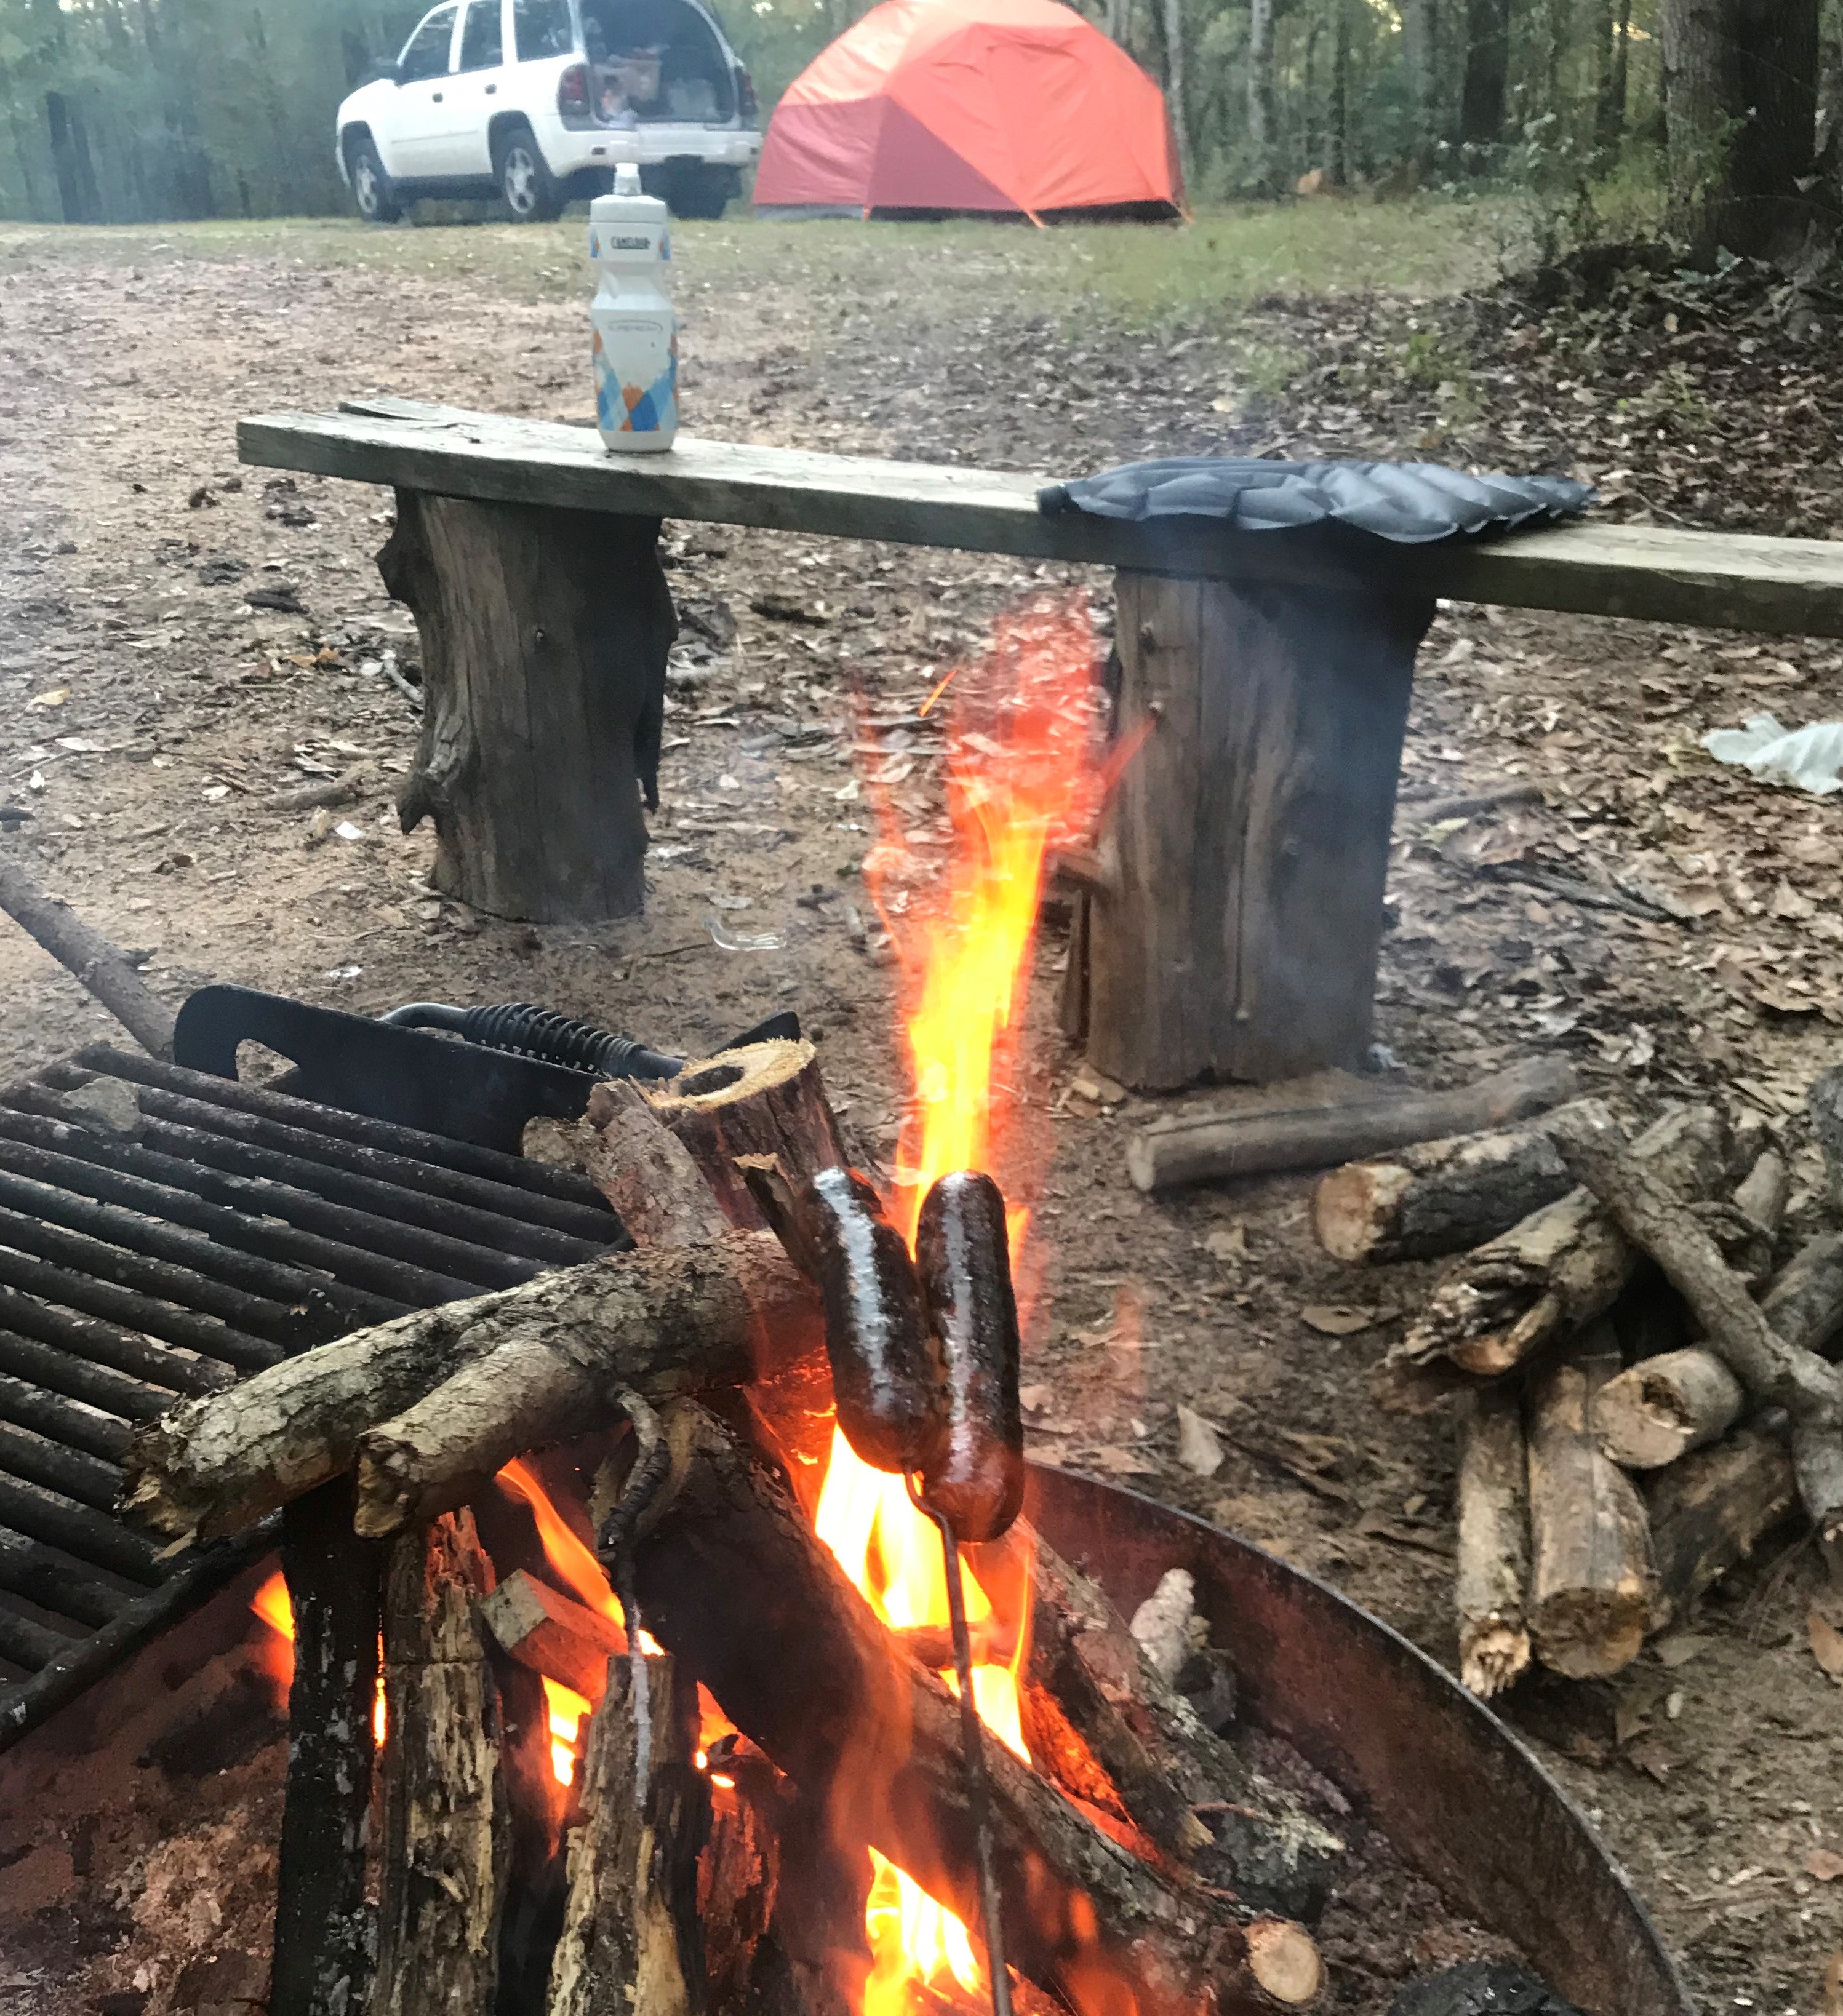 Obligatory campsite fire with tent in the background photo.